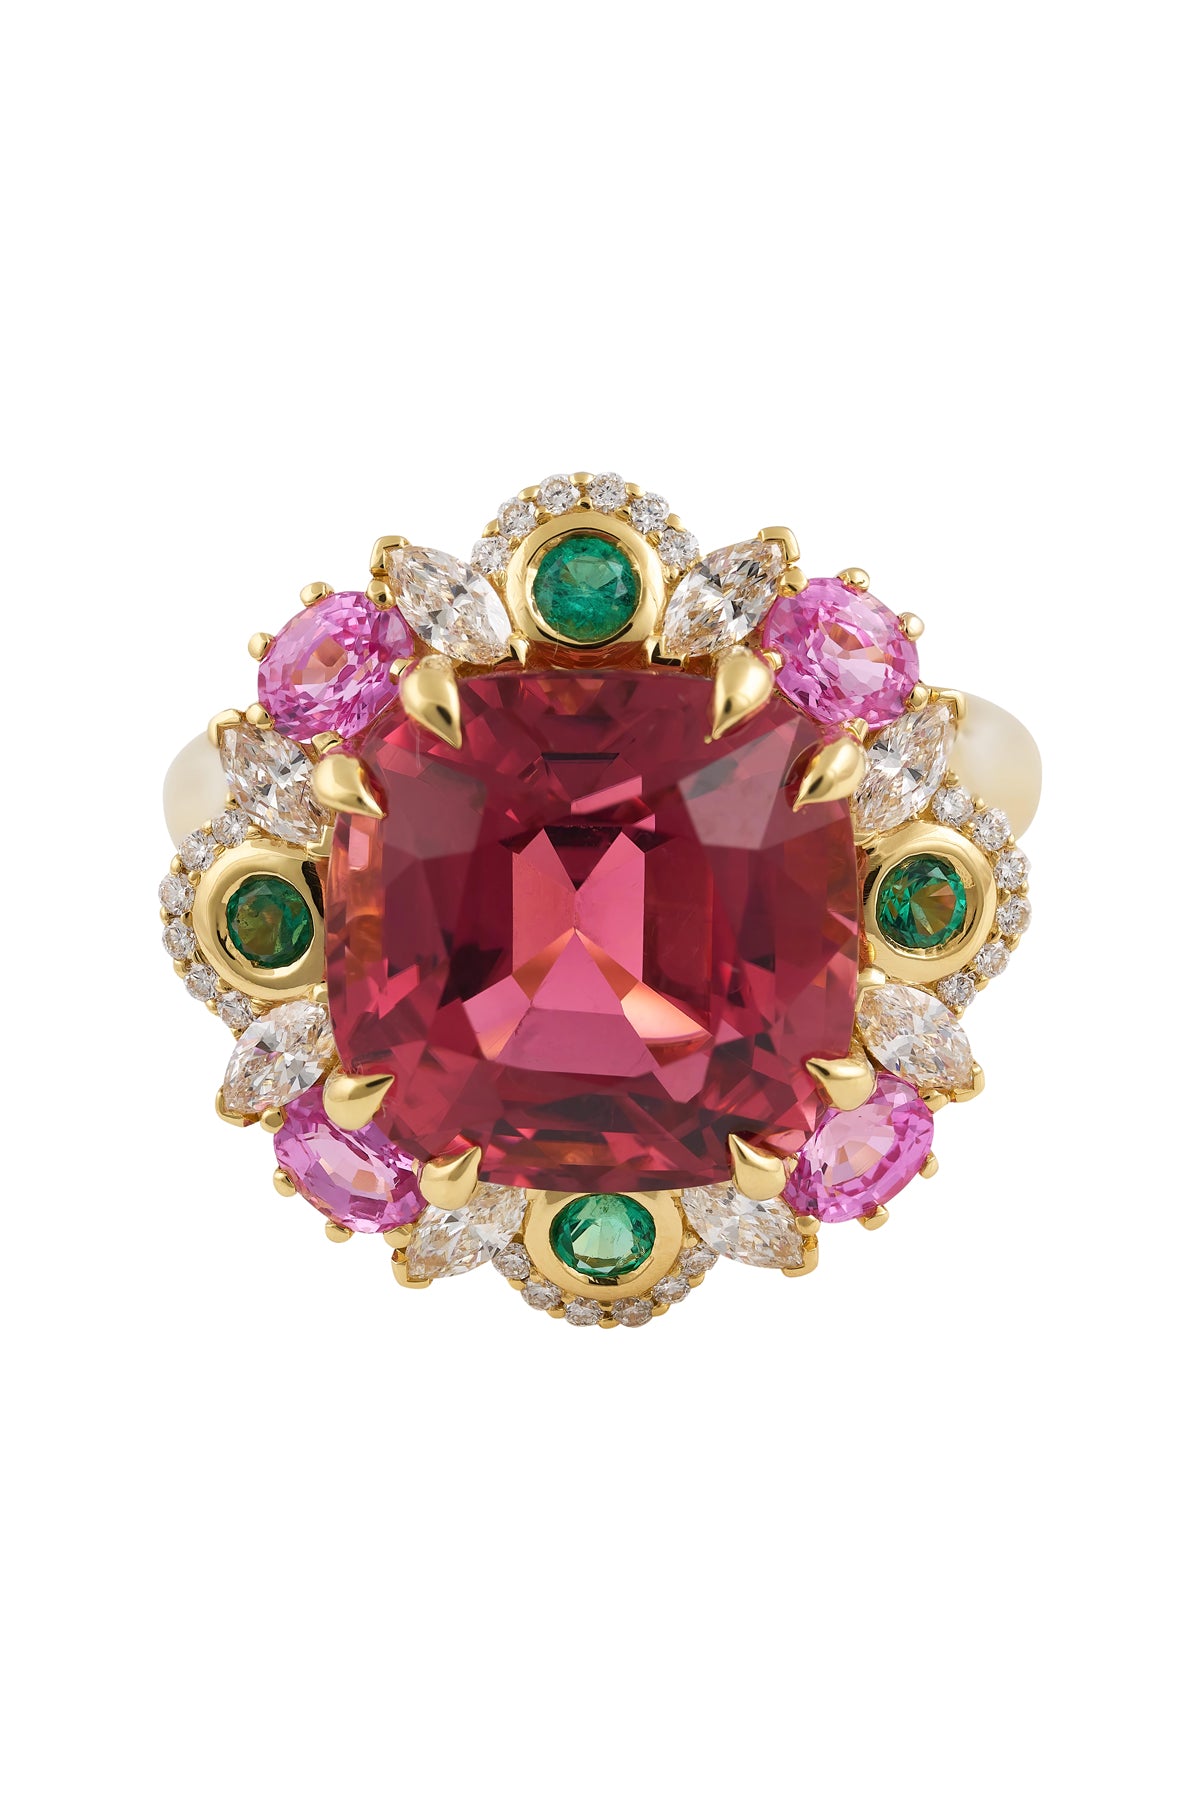 9.58 Carat Pink Tourmaline Ring With Sapphires And Emeralds from LeGassick Jewellery.